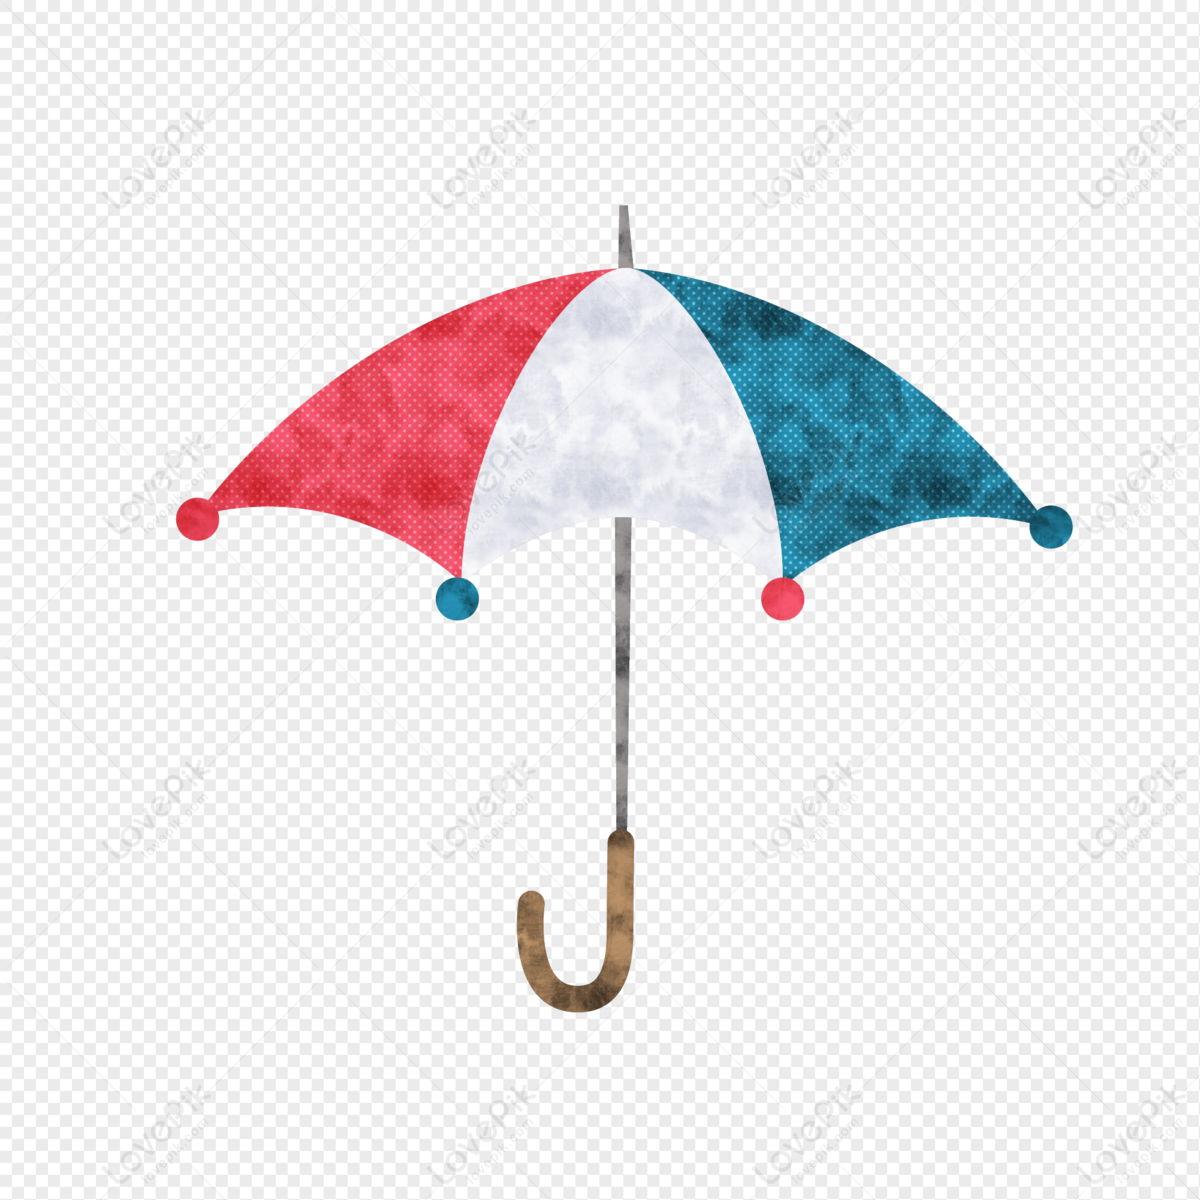 Small Ball Umbrella PNG Transparent And Clipart Image For Free Download -  Lovepik | 401549206